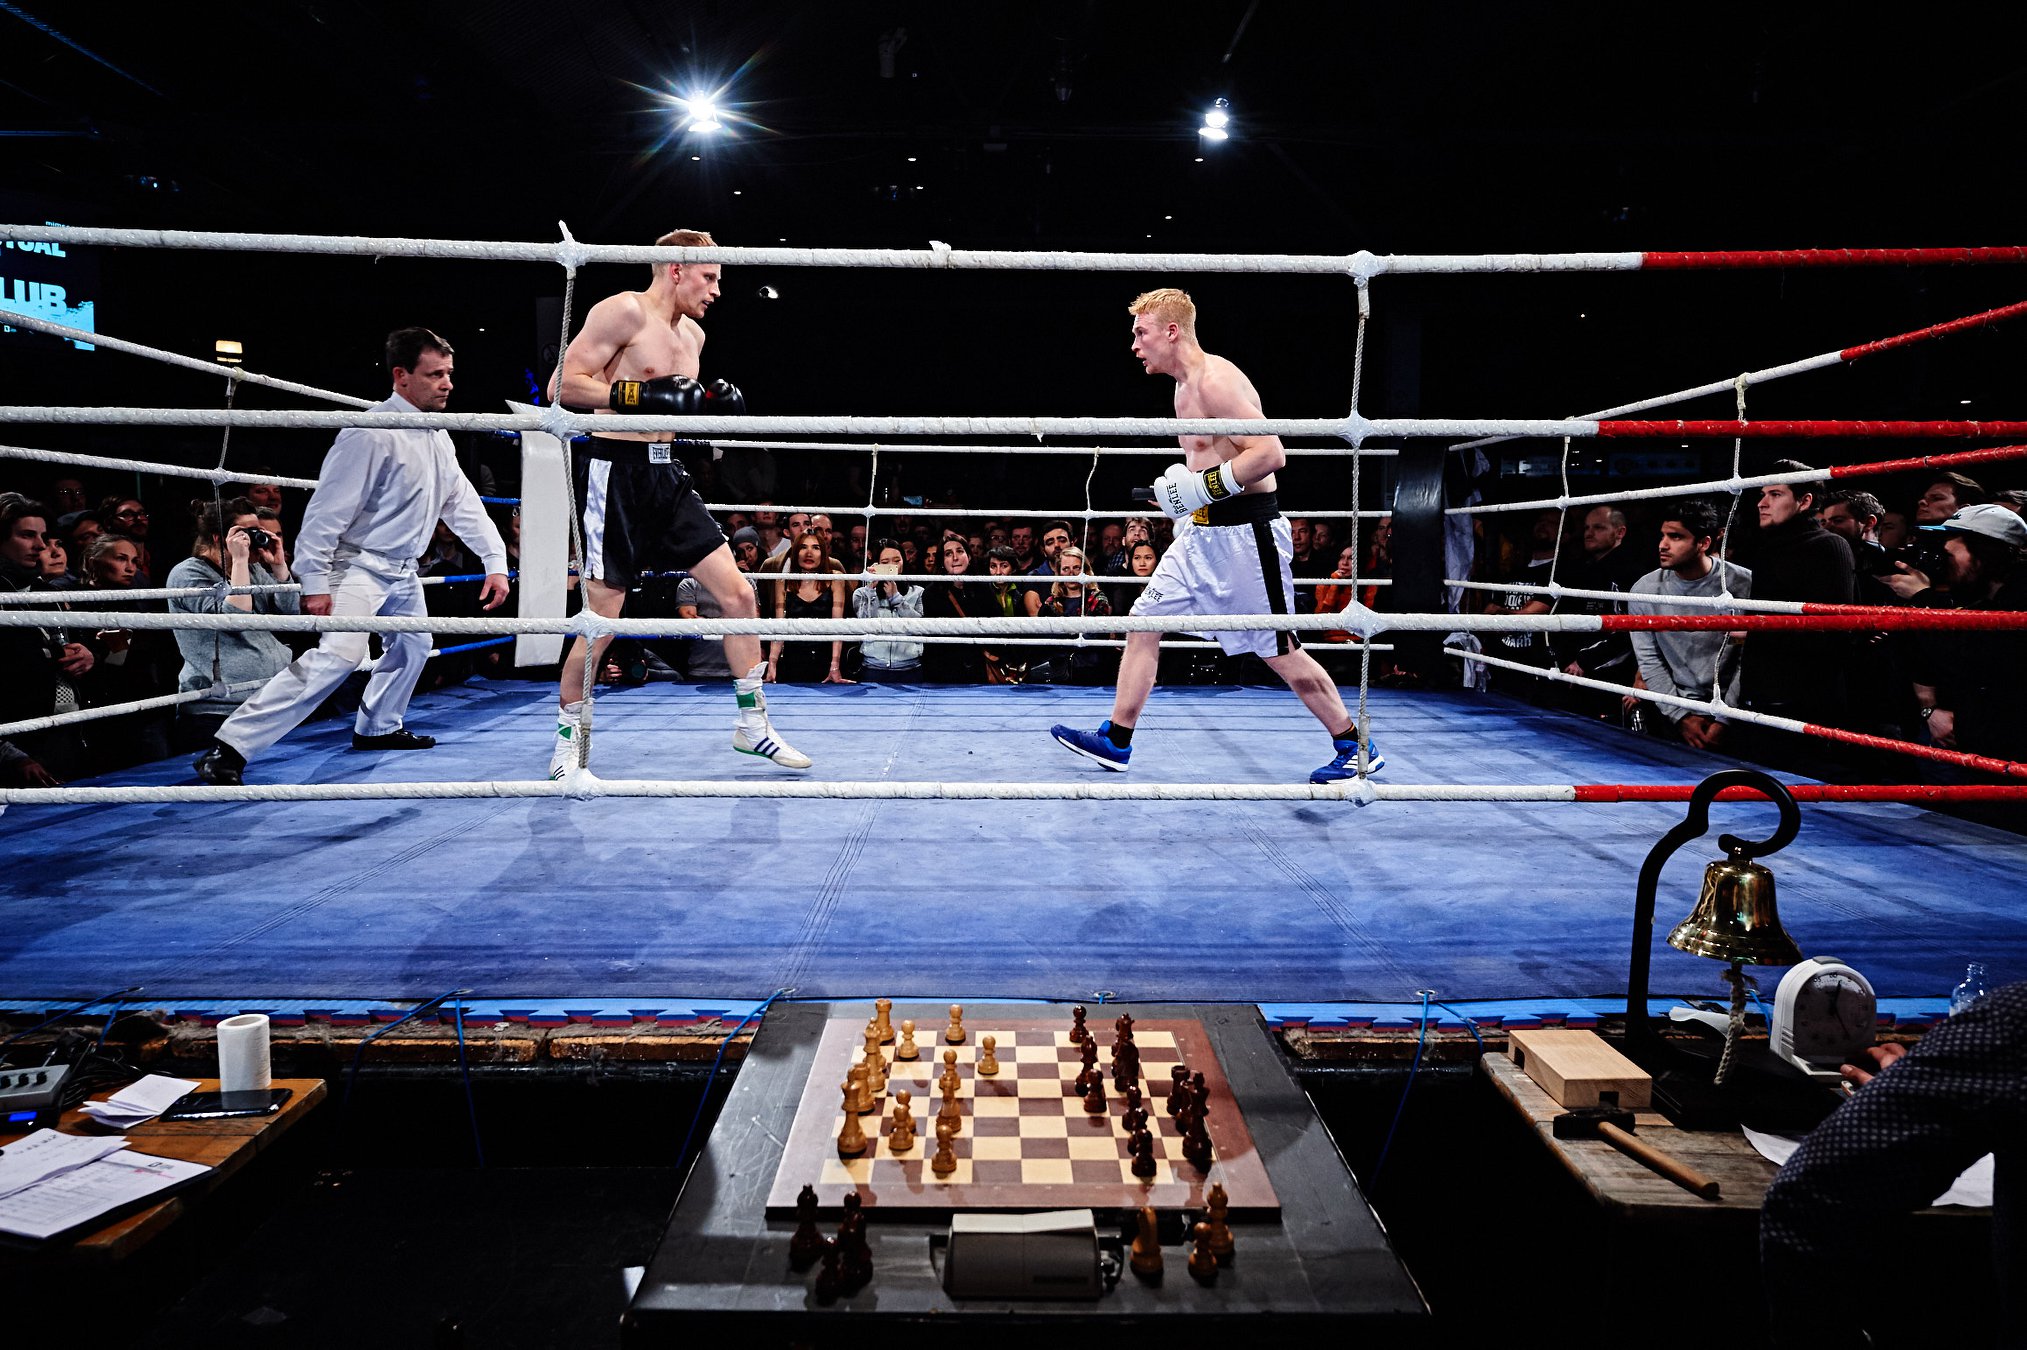 The inventor of the sport chess boxing, action artist Iepe Rubingh